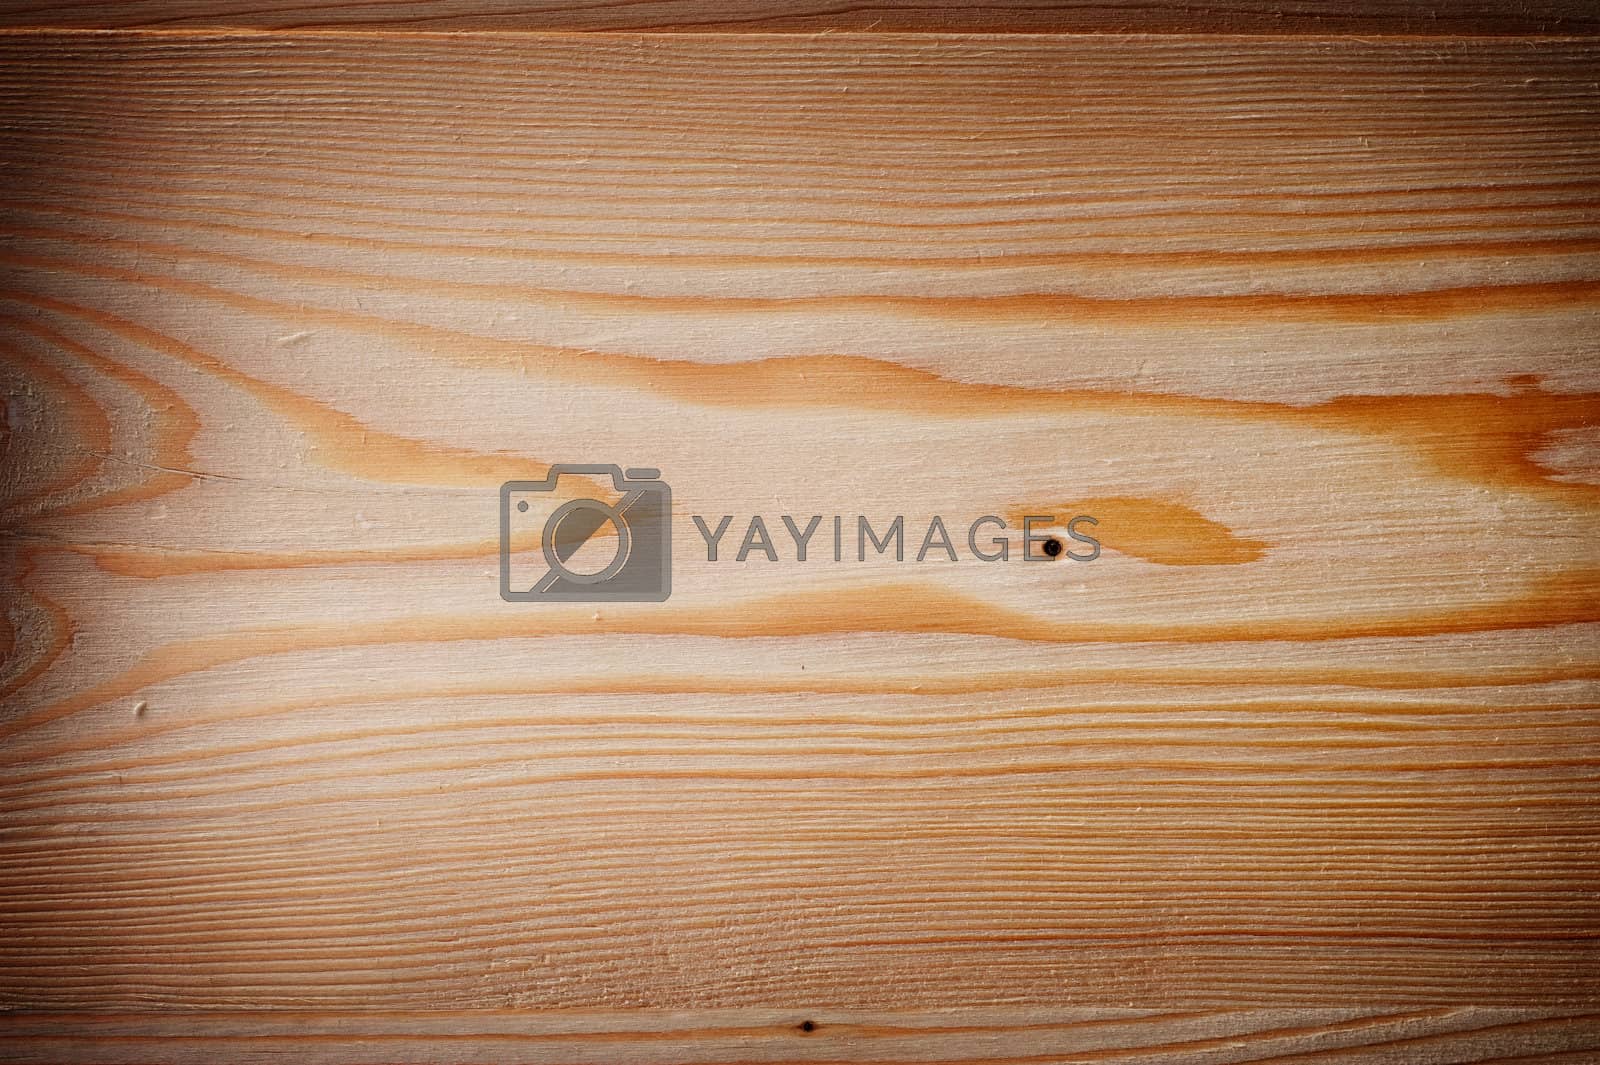 Royalty free image of Wood Background by SubbotinaA